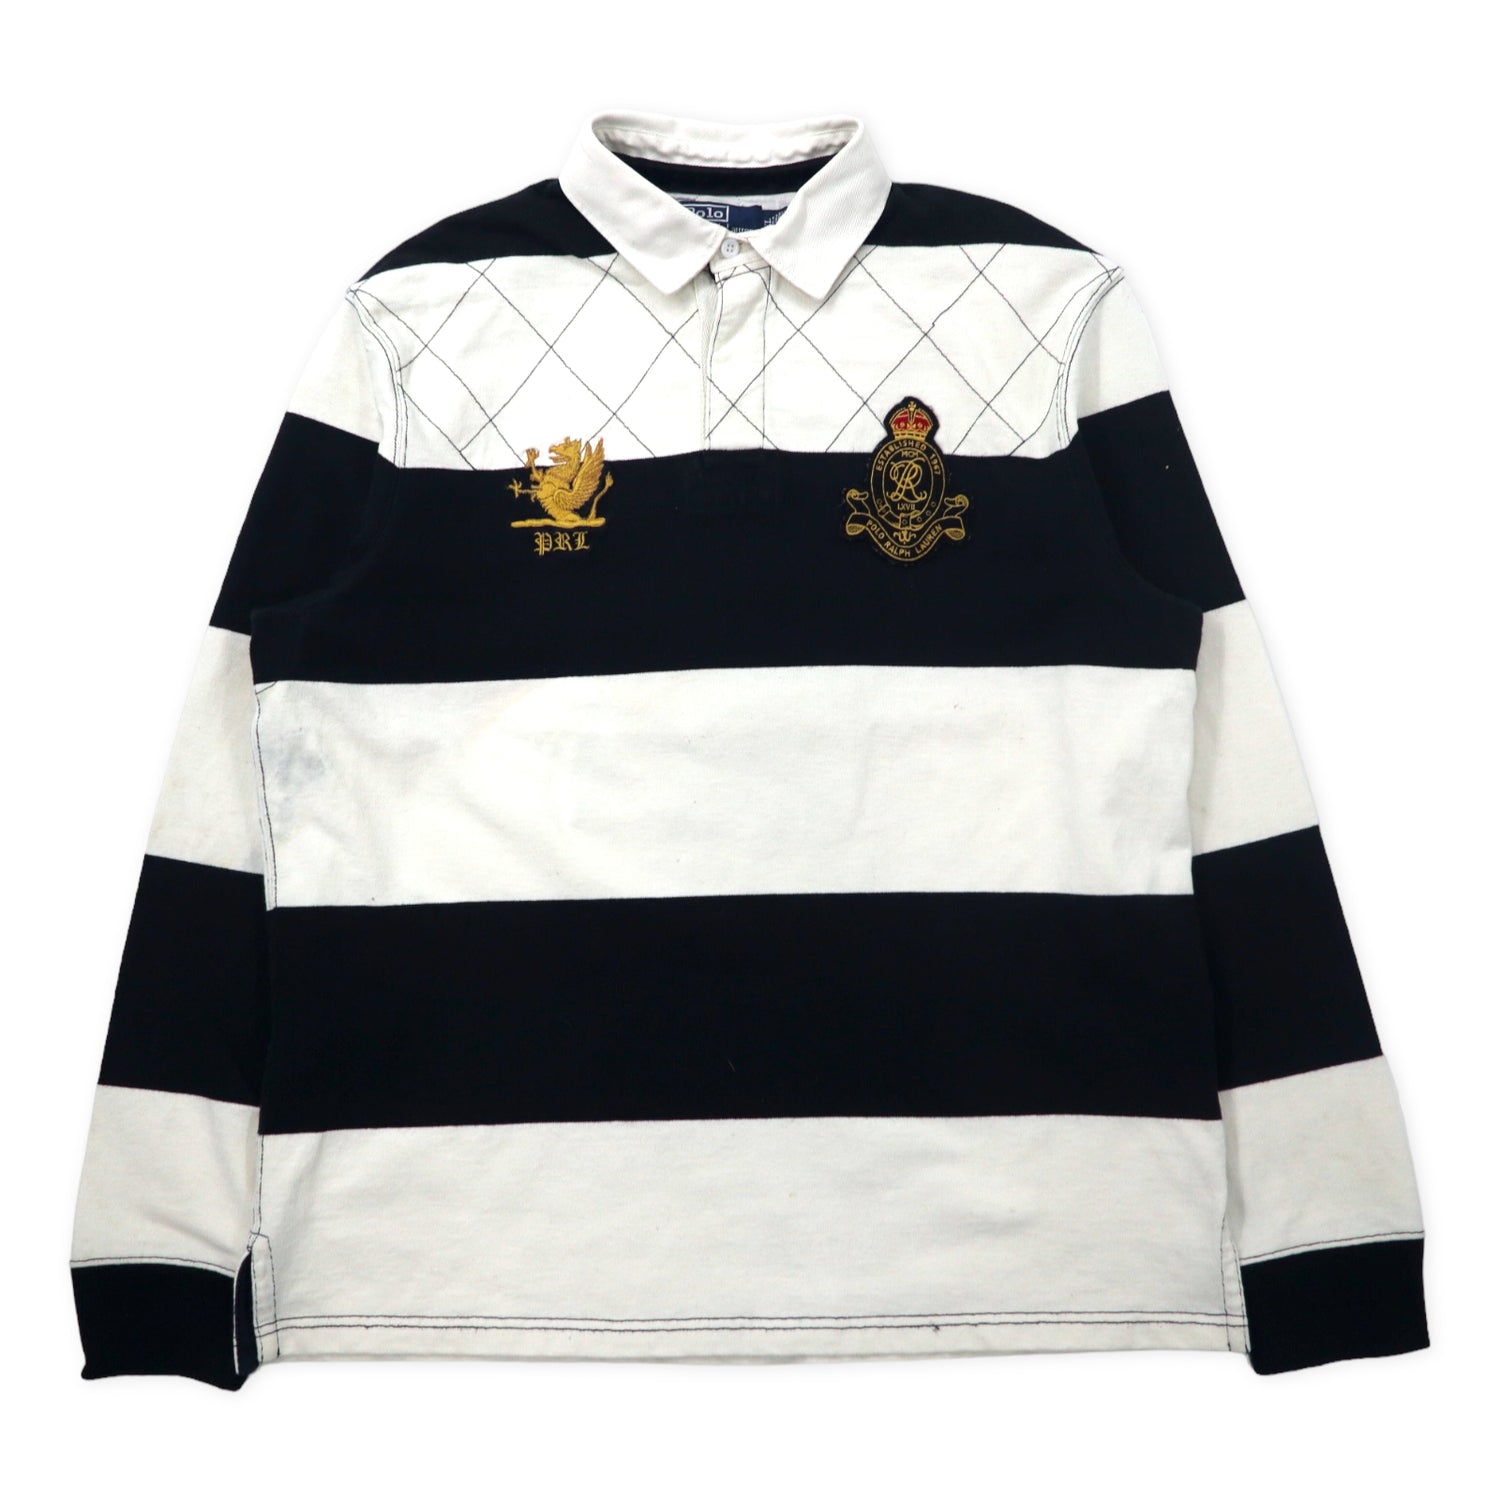 POLO BY RALPH LAUREN STRIPED RUGBY SHIRT XL White Black Cotton 